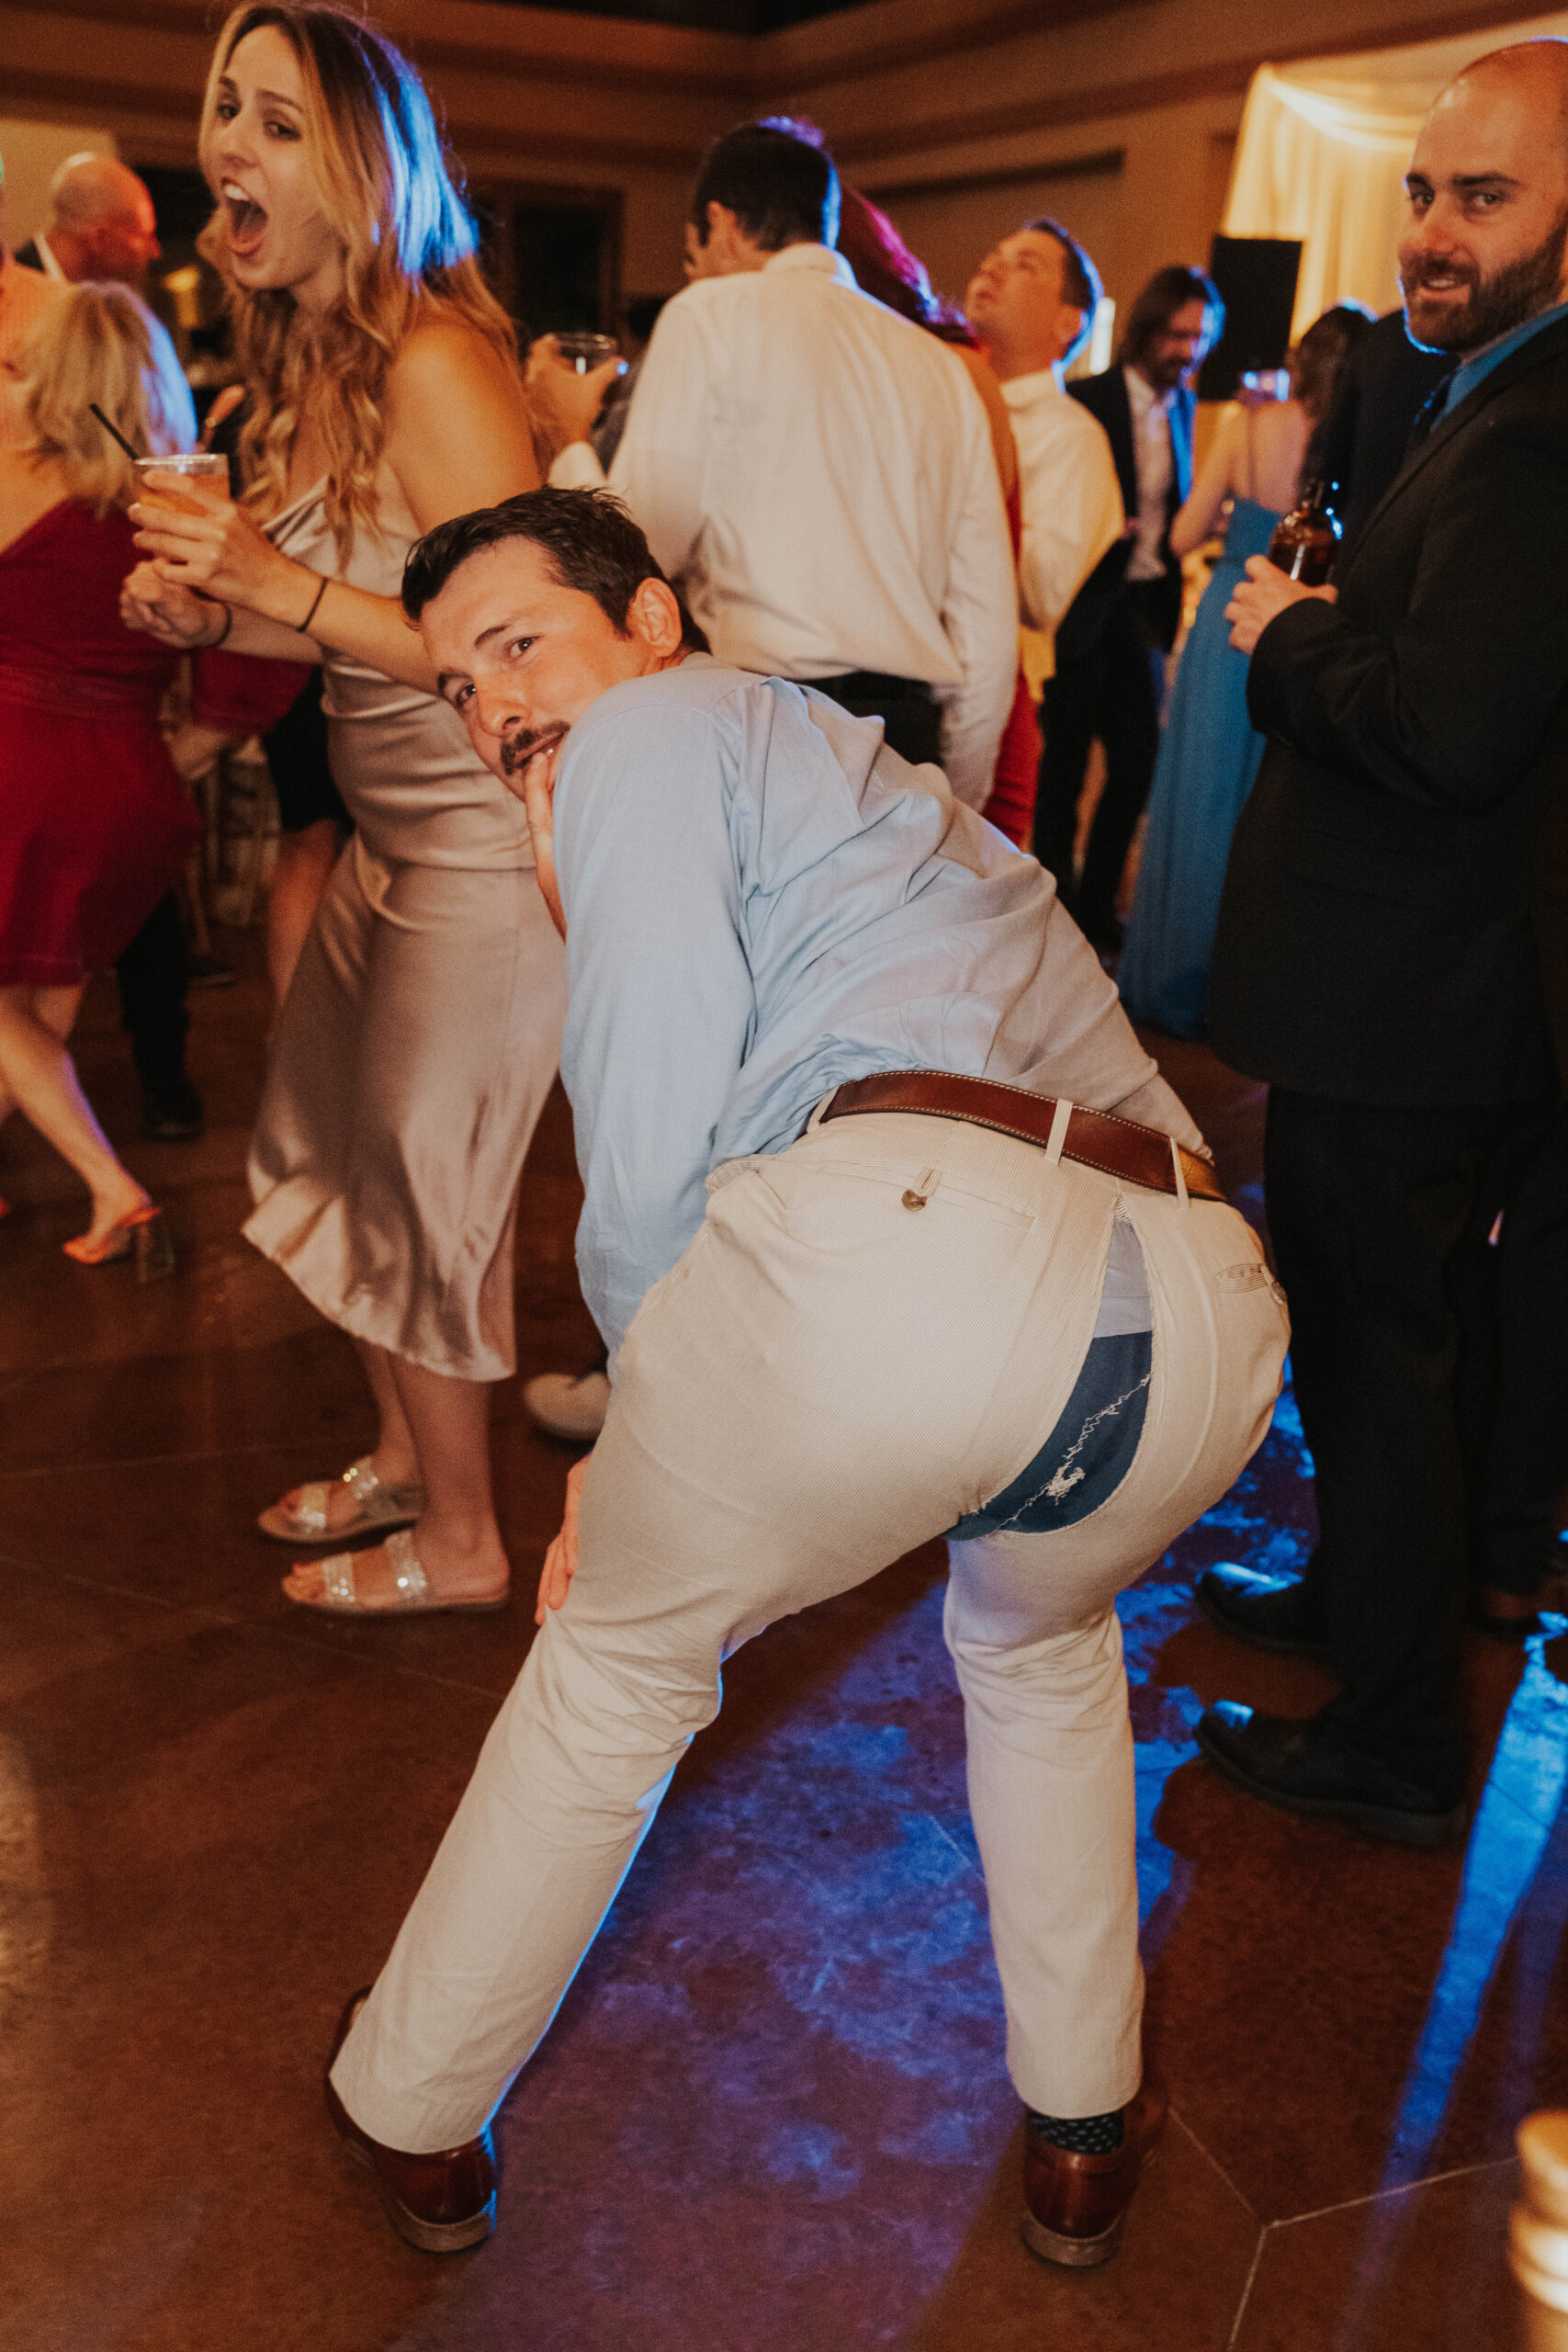 Wedding Guest Rips Pants While Dancing